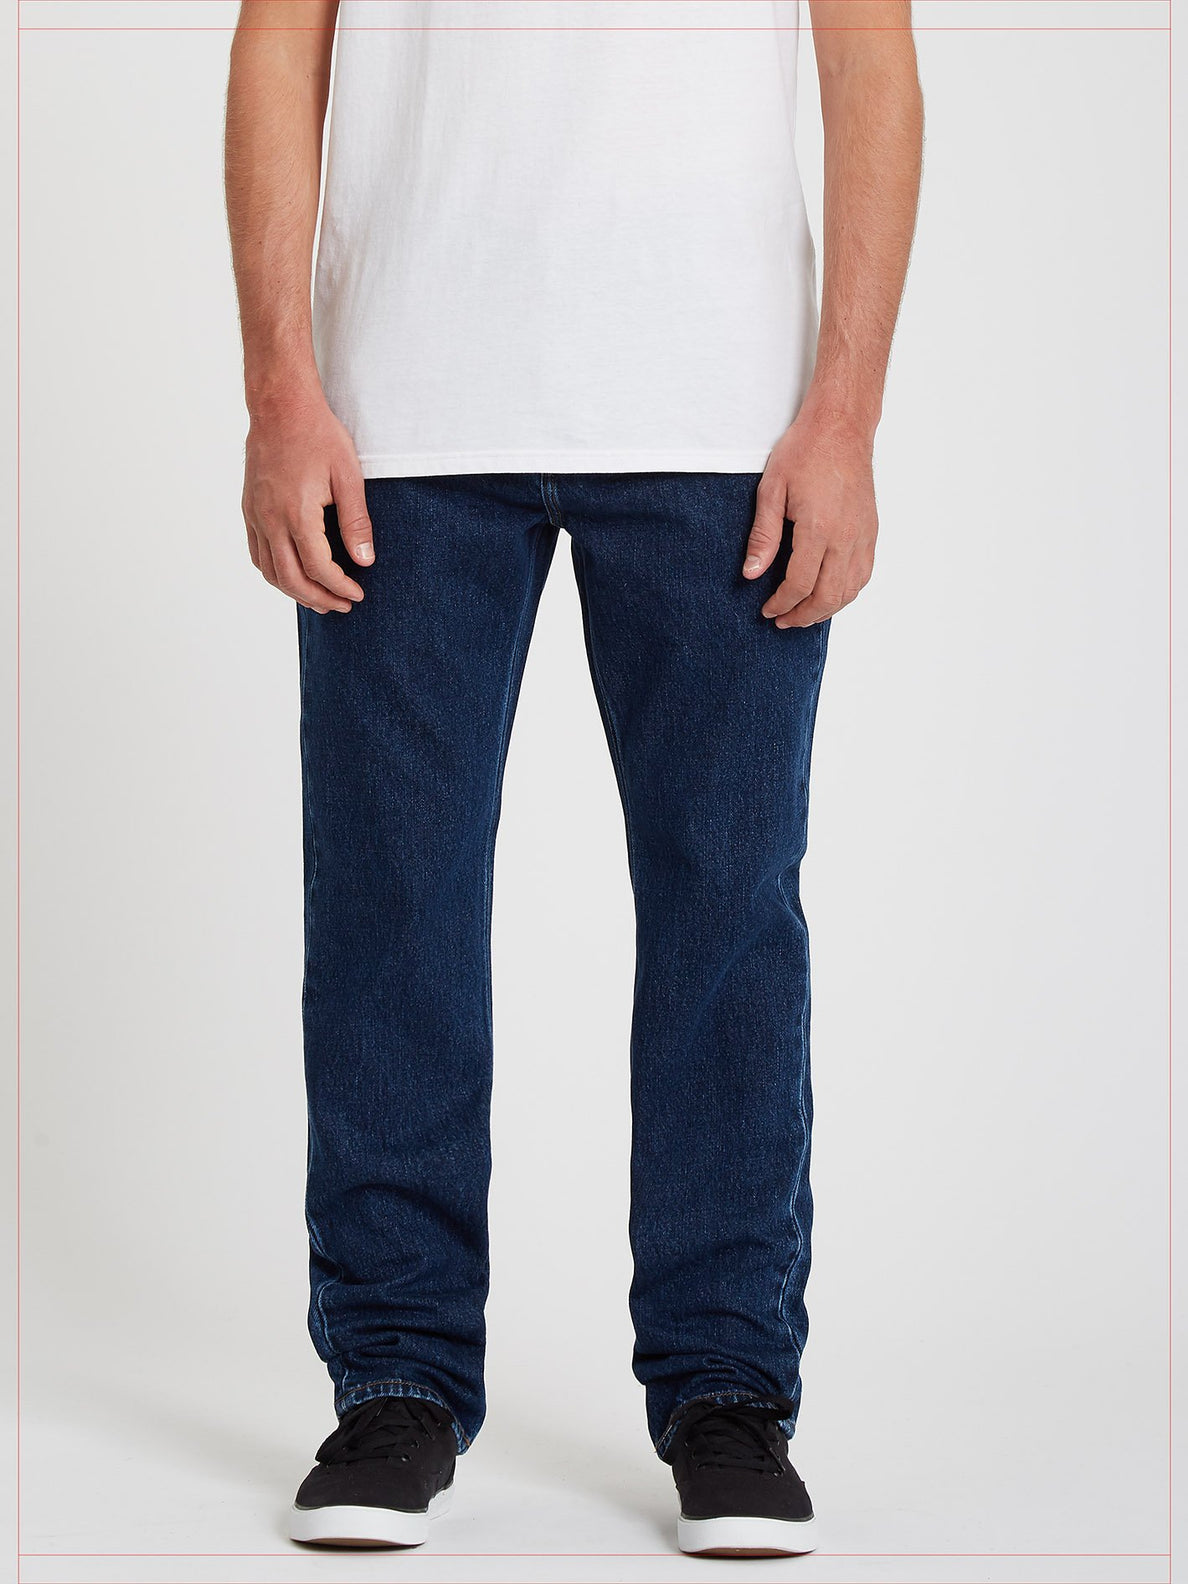 Louie Lopez Tapered Denim - BLUE RINSE (A1932100_RNE) [F]